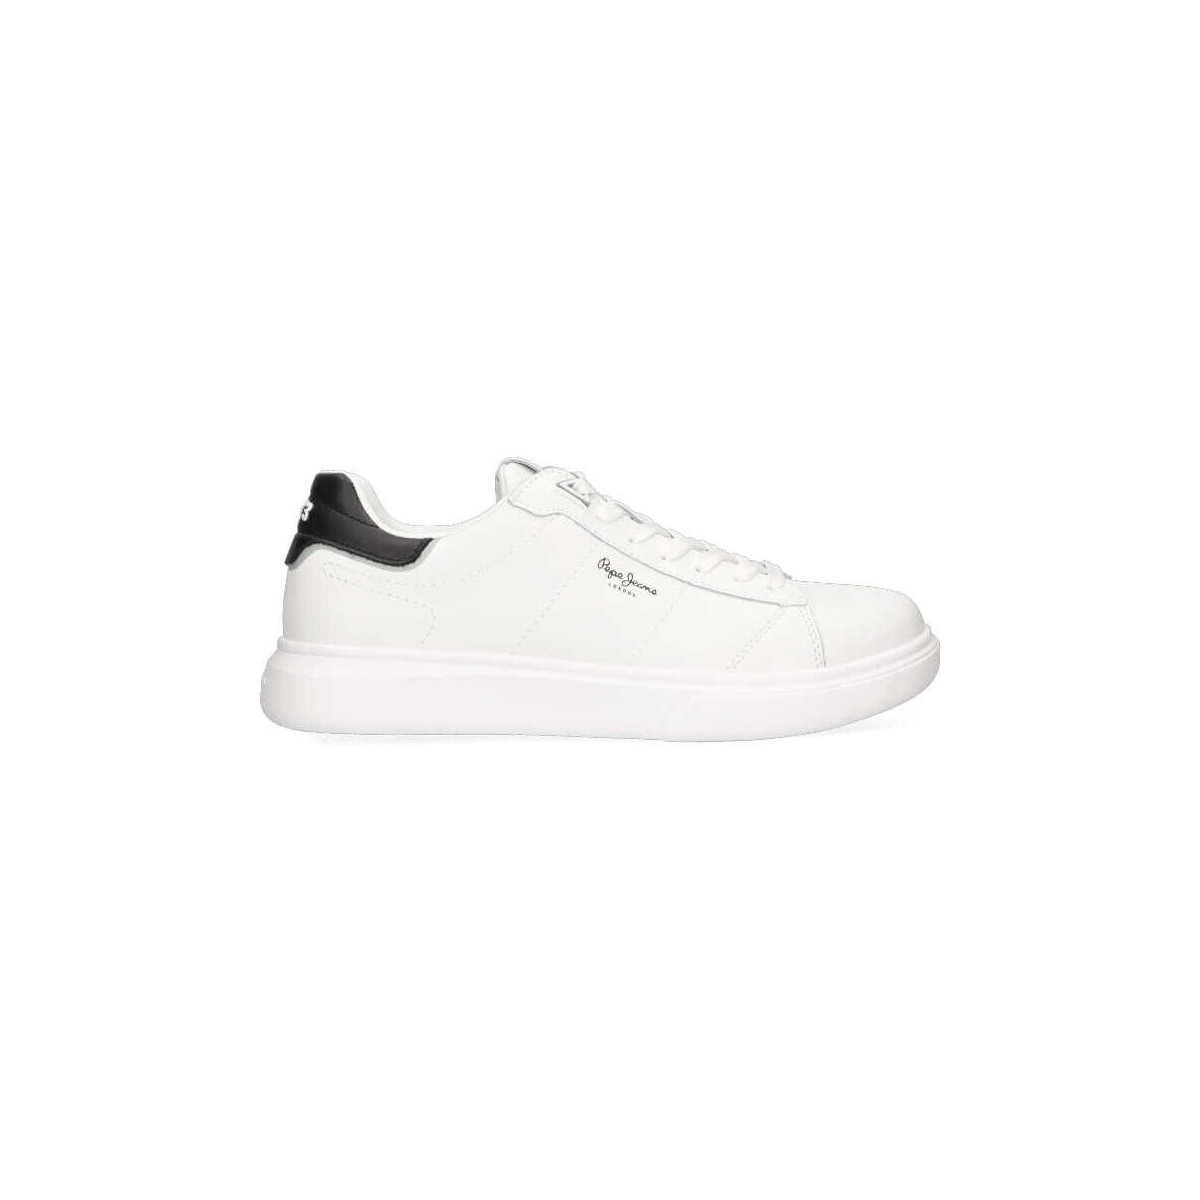 Pepe jeans  Sneakers Pepe jeans 74317